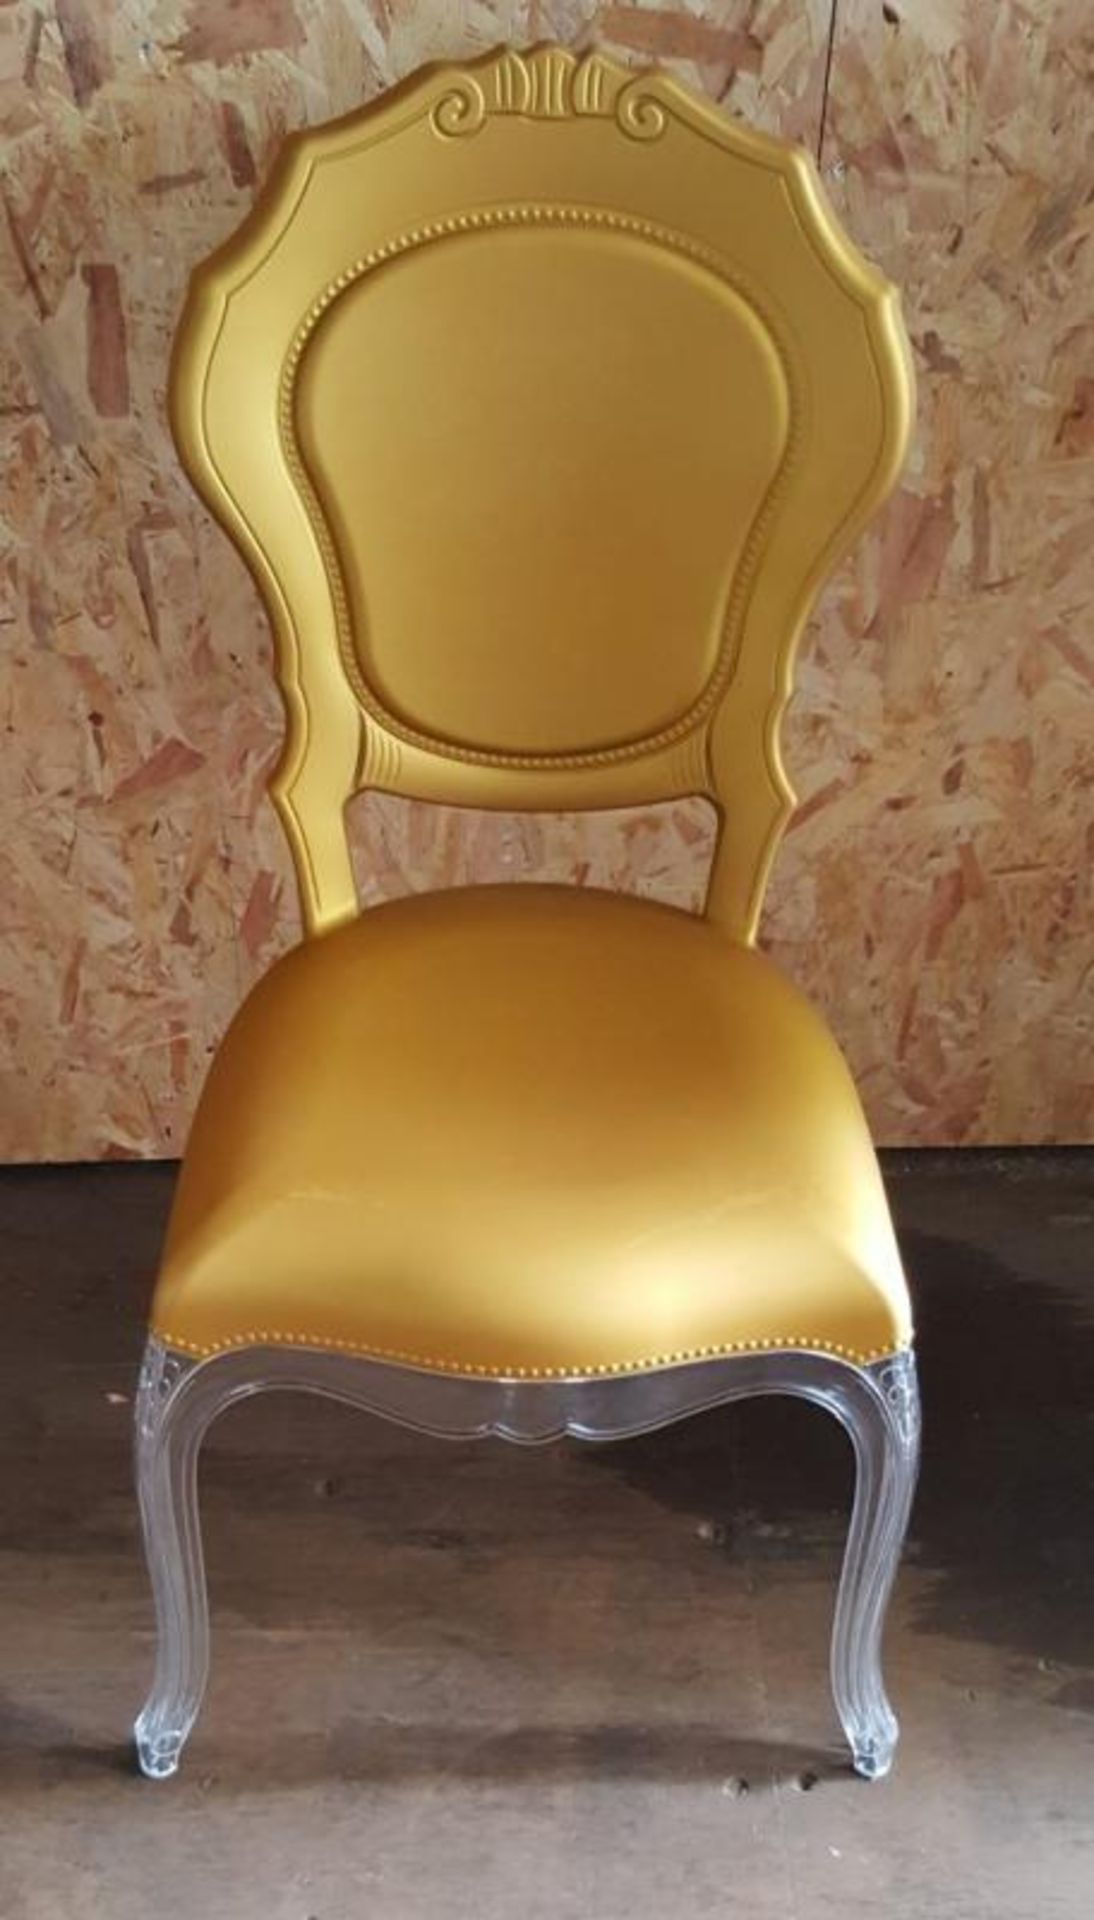 5 x Acrylic Baroque-style 'Belle Epoque' Chairs Featuring A Clear Polycarbonate Frame With An Attrac